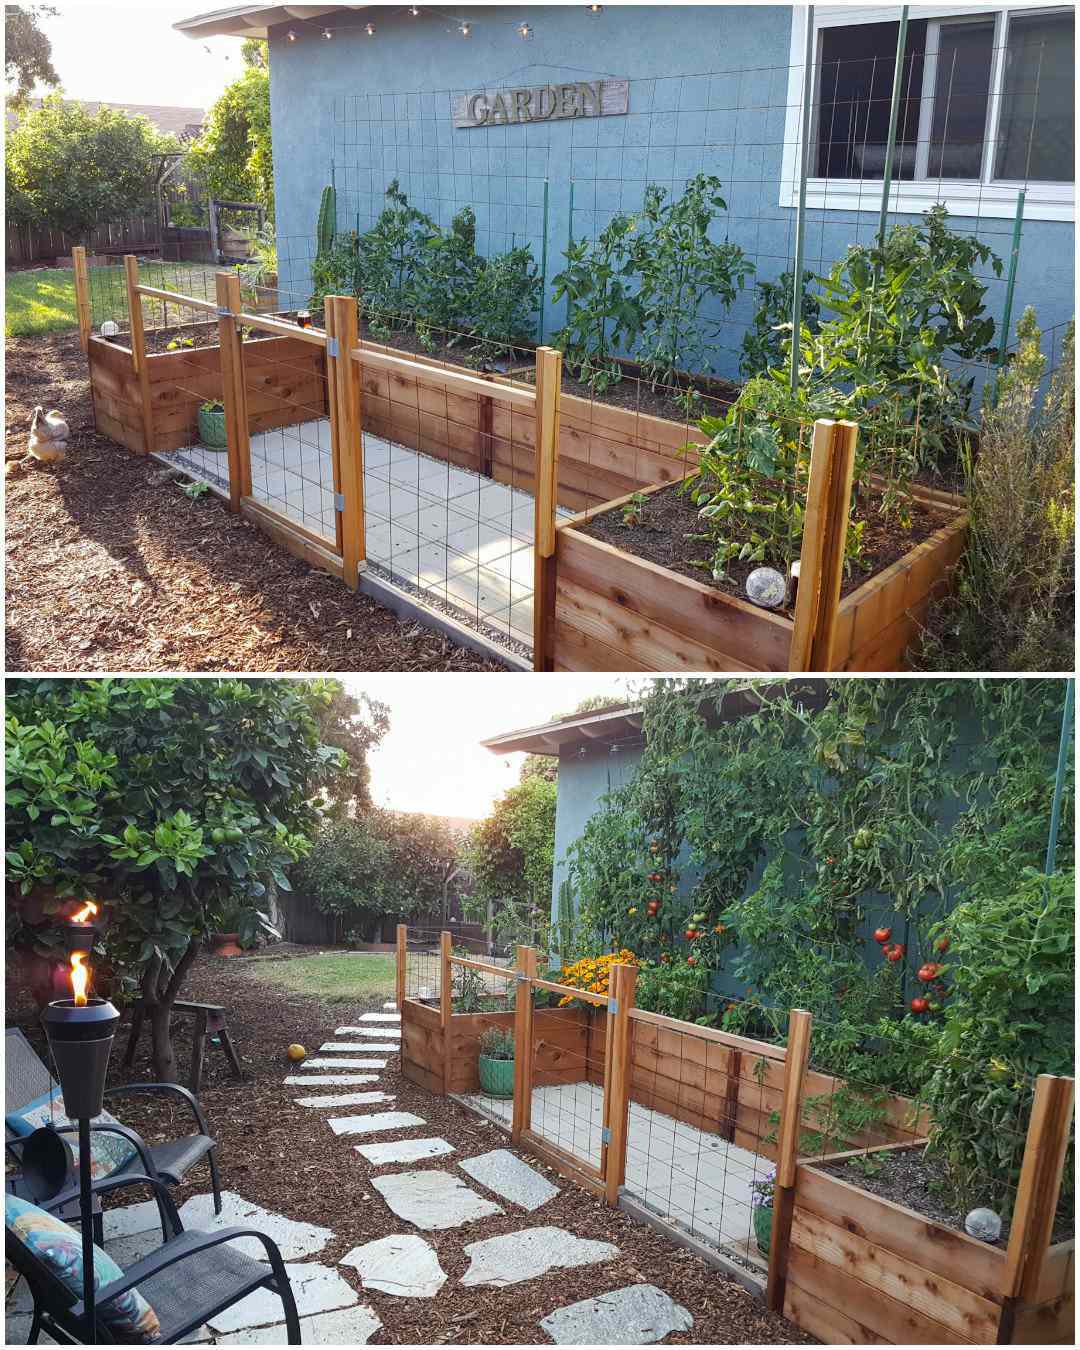 A two part image collage of a U-shaped garden bed area that is butted up against the side of a blue green house. The first image shows the raised beds planted out with young tomato plants, along the backside of the garden beds are trellises that will be used to help the tomatoes climb as they grow. The surrounding area of the garden bed area has been fenced off with remesh and wood, creating a mini fence and gate. The second image shows the same area months later, the tomatoes have grown the the roof of the house and there are many green and ripe tomatoes that are contrasting against the green foliage of the tomatoes. There are two chairs visible directly outside of the garden area and a tiki torch is lit next to the chairs. 